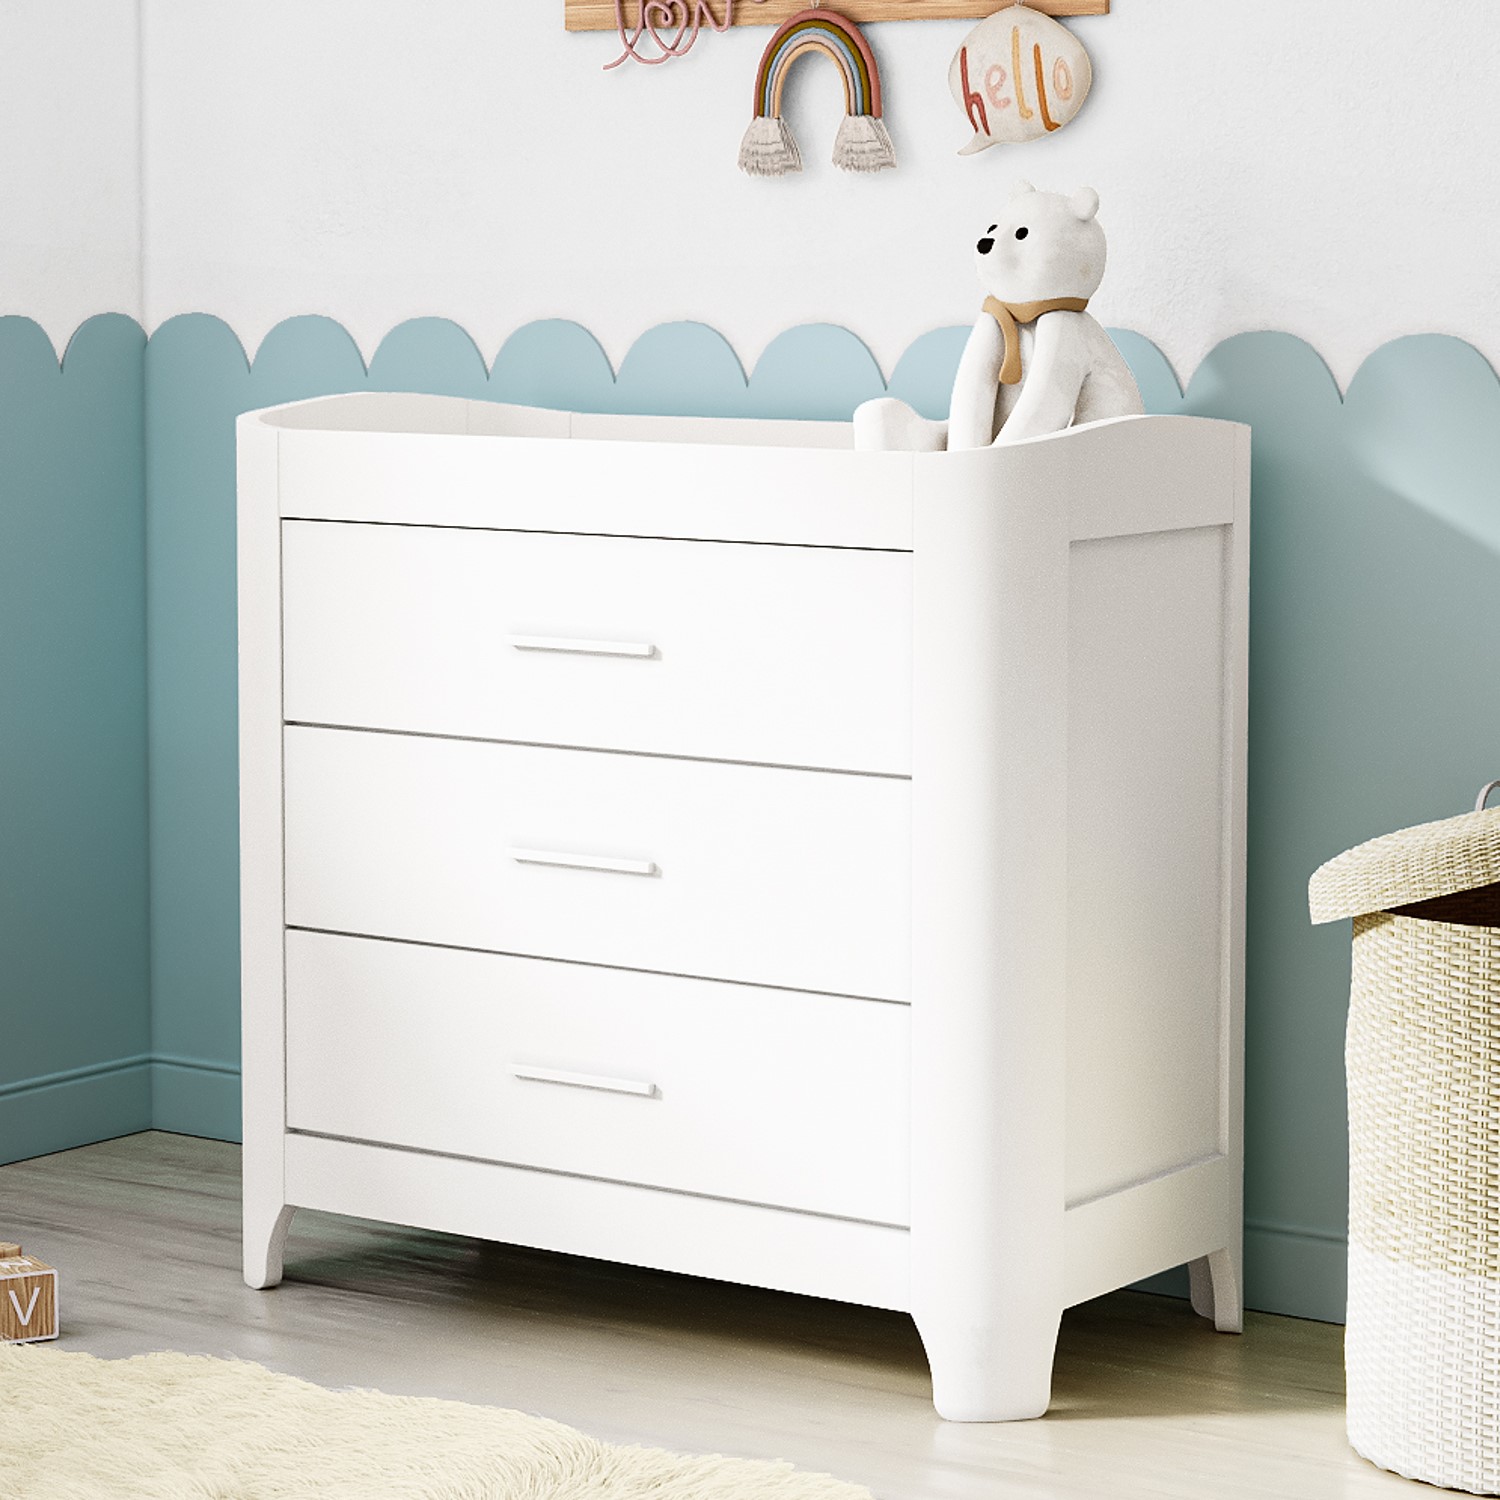 Photo of White pine wood changing unit with 3 drawers and curved edges - shiloh